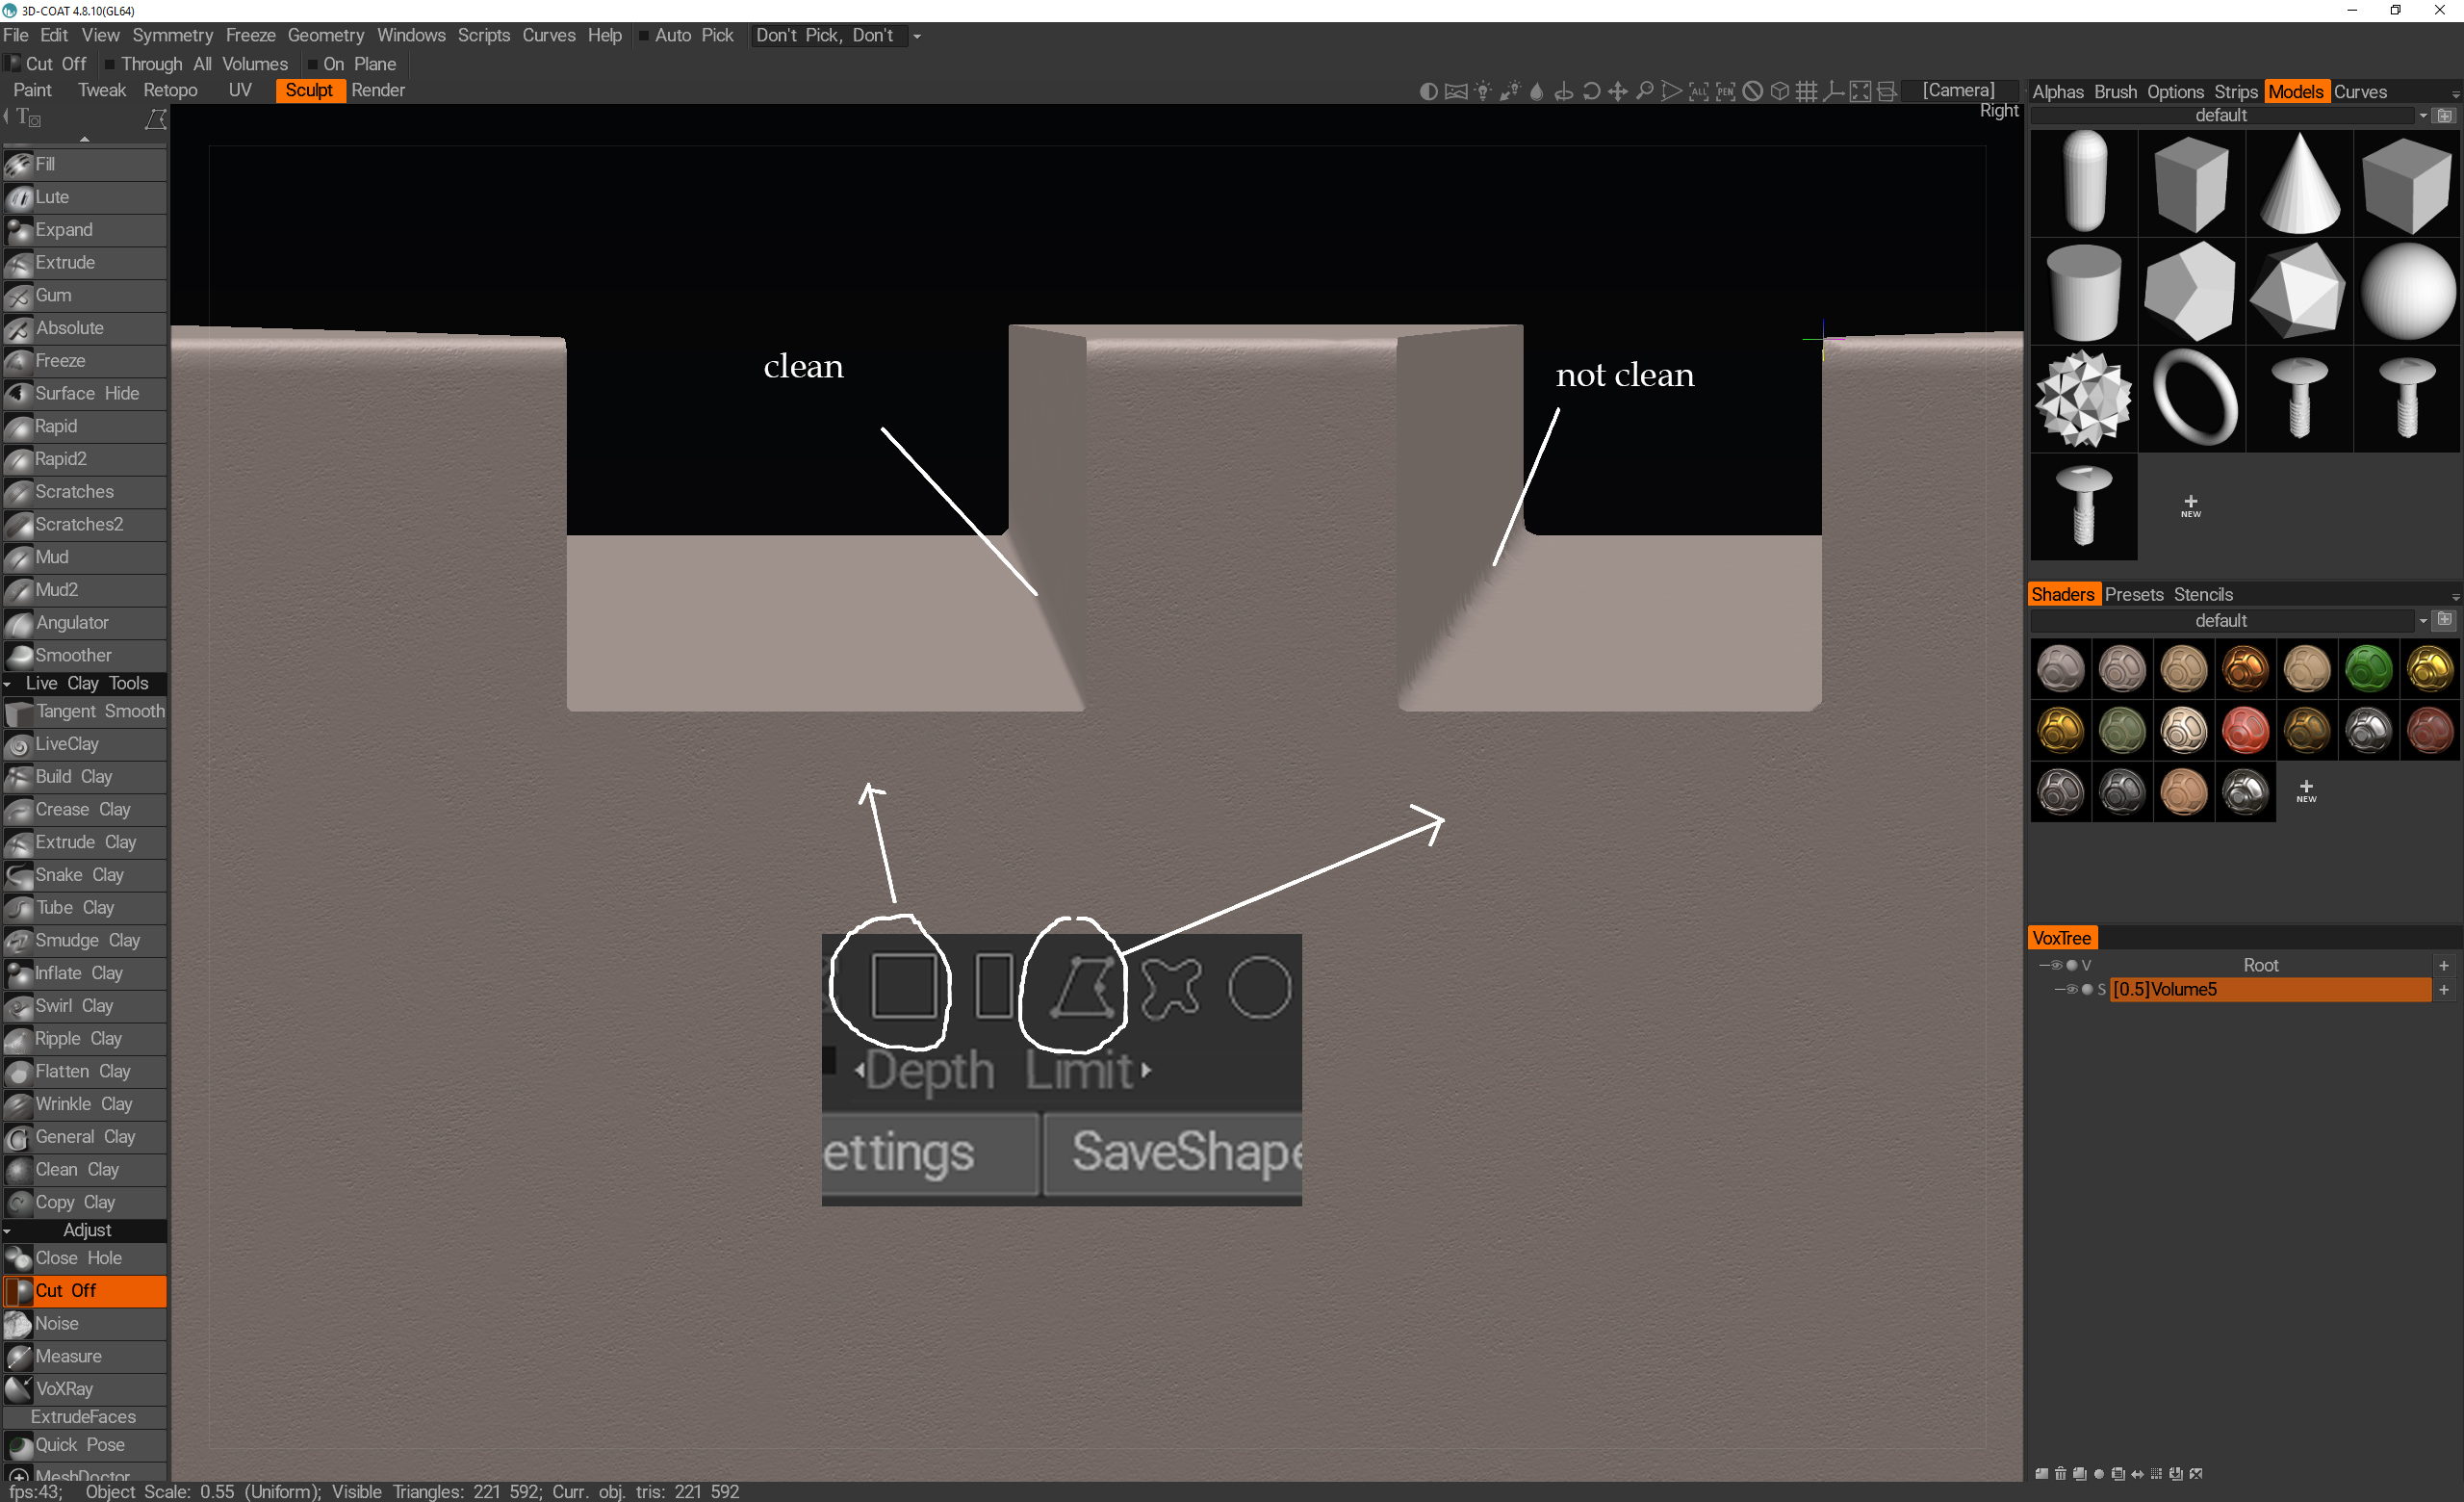 Make edges and curves smoother using the Smooth tool